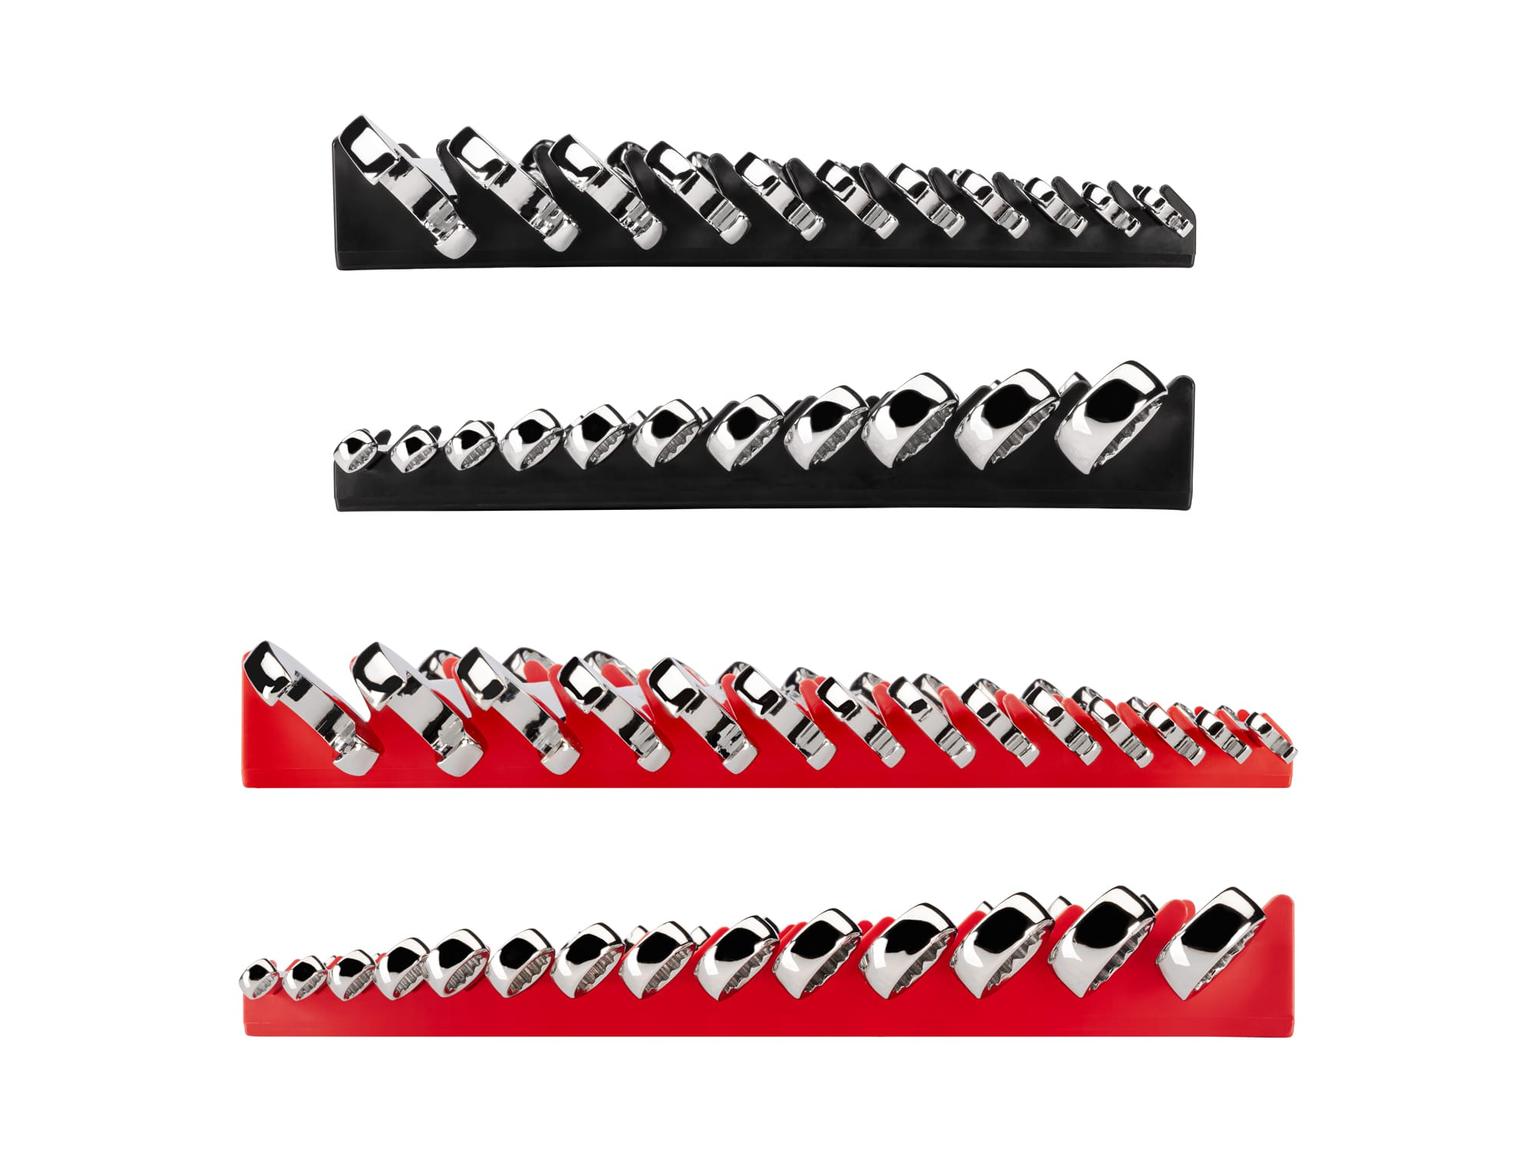 TEKTON WCB91303-T Combination Wrench Set with Rack, 25-Piece (1/4 - 3/4 in., 6 - 19 mm)